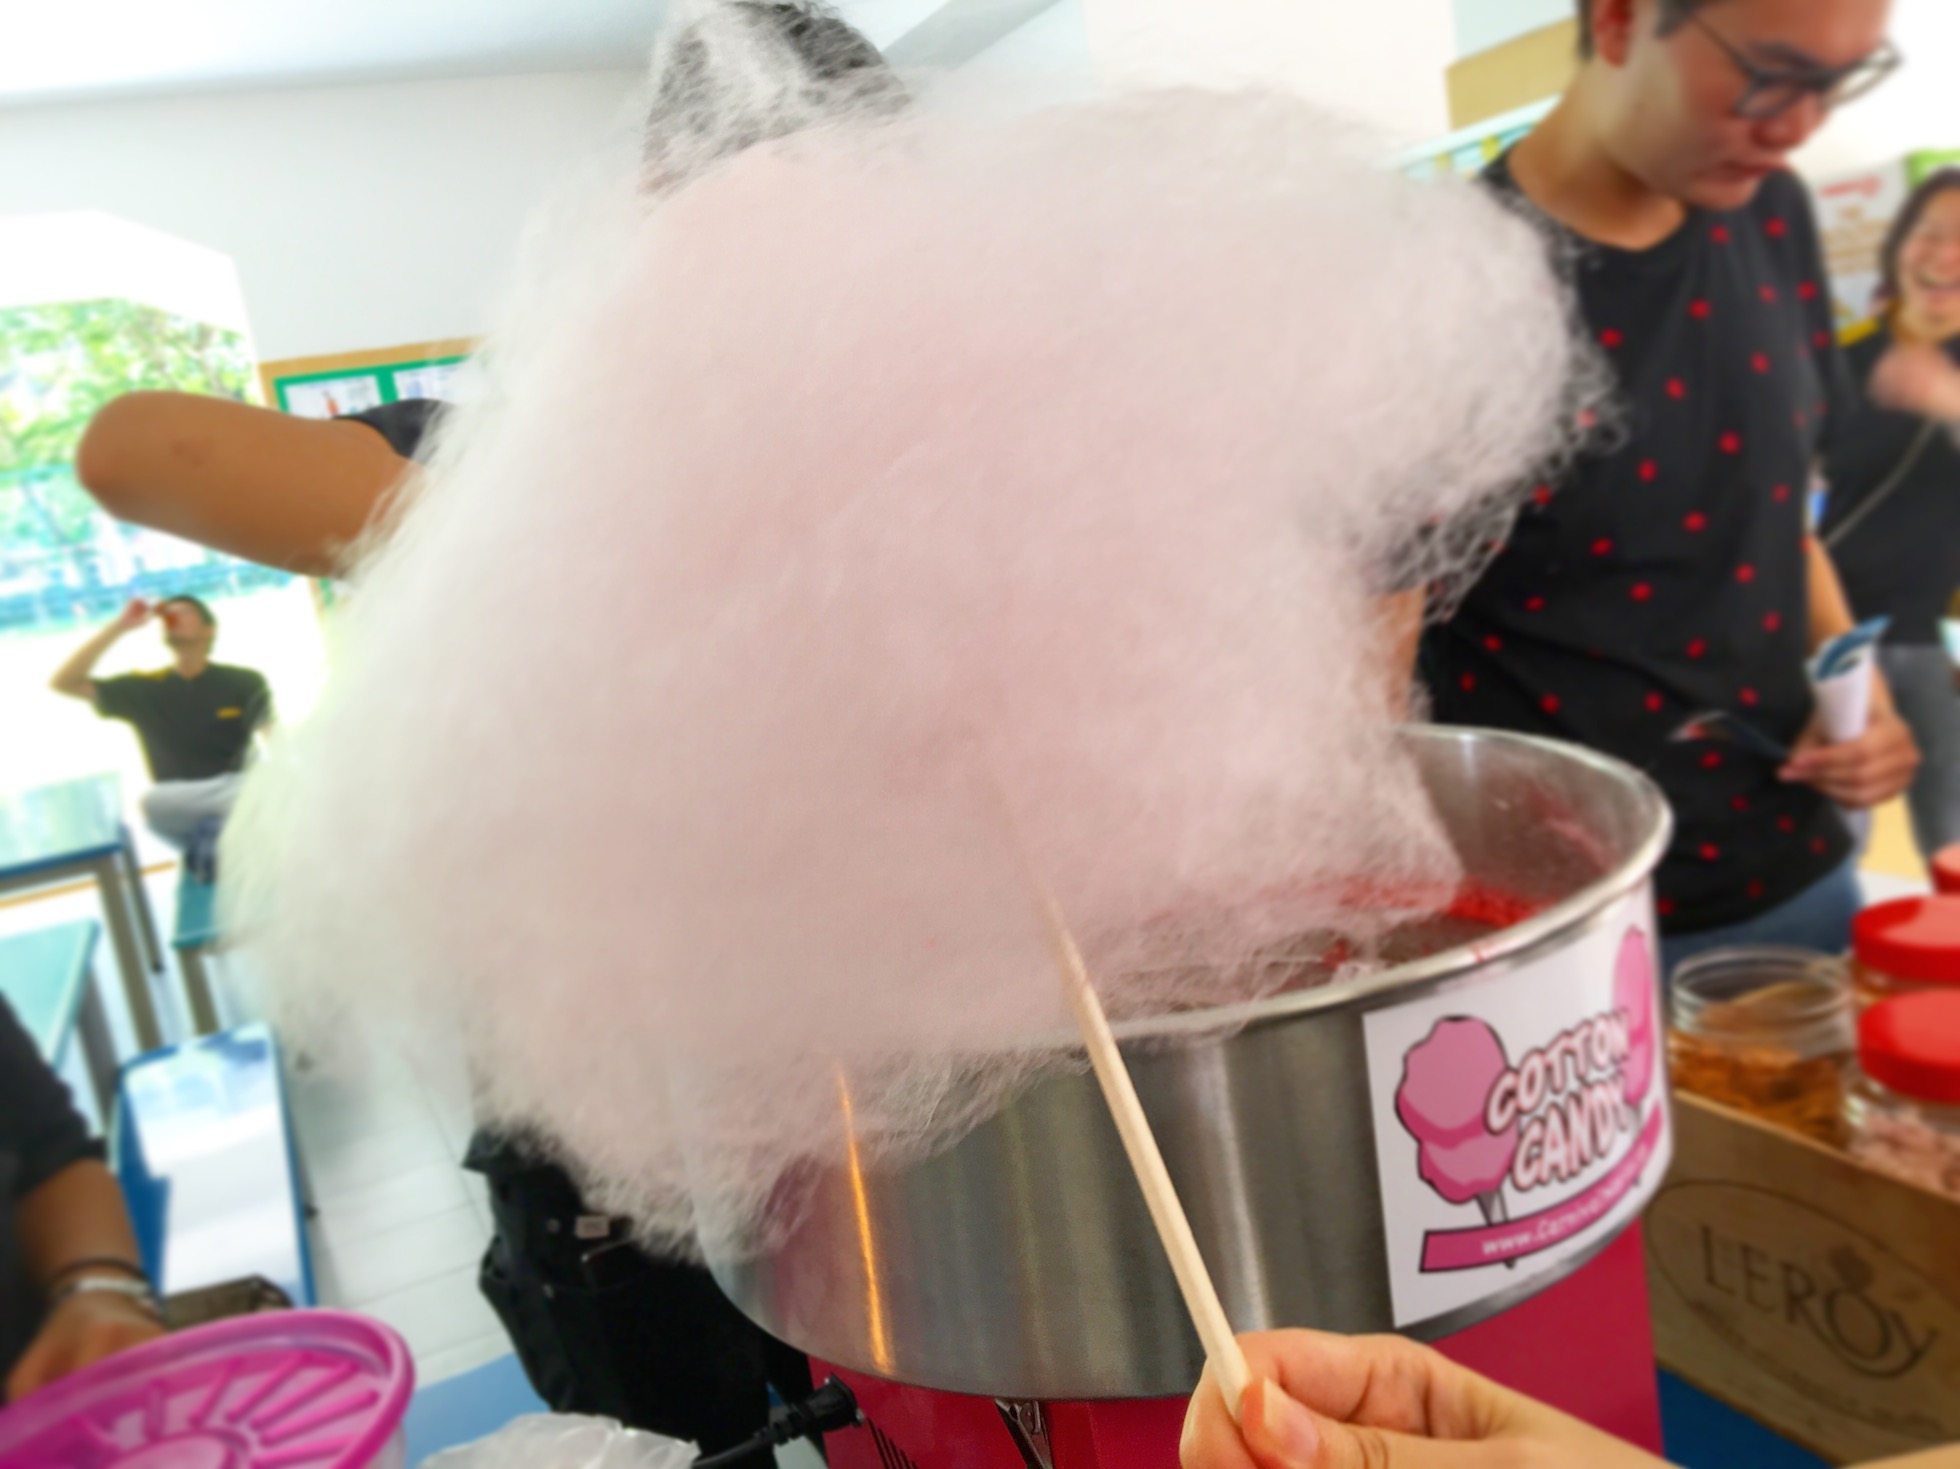 Candy Floss Station